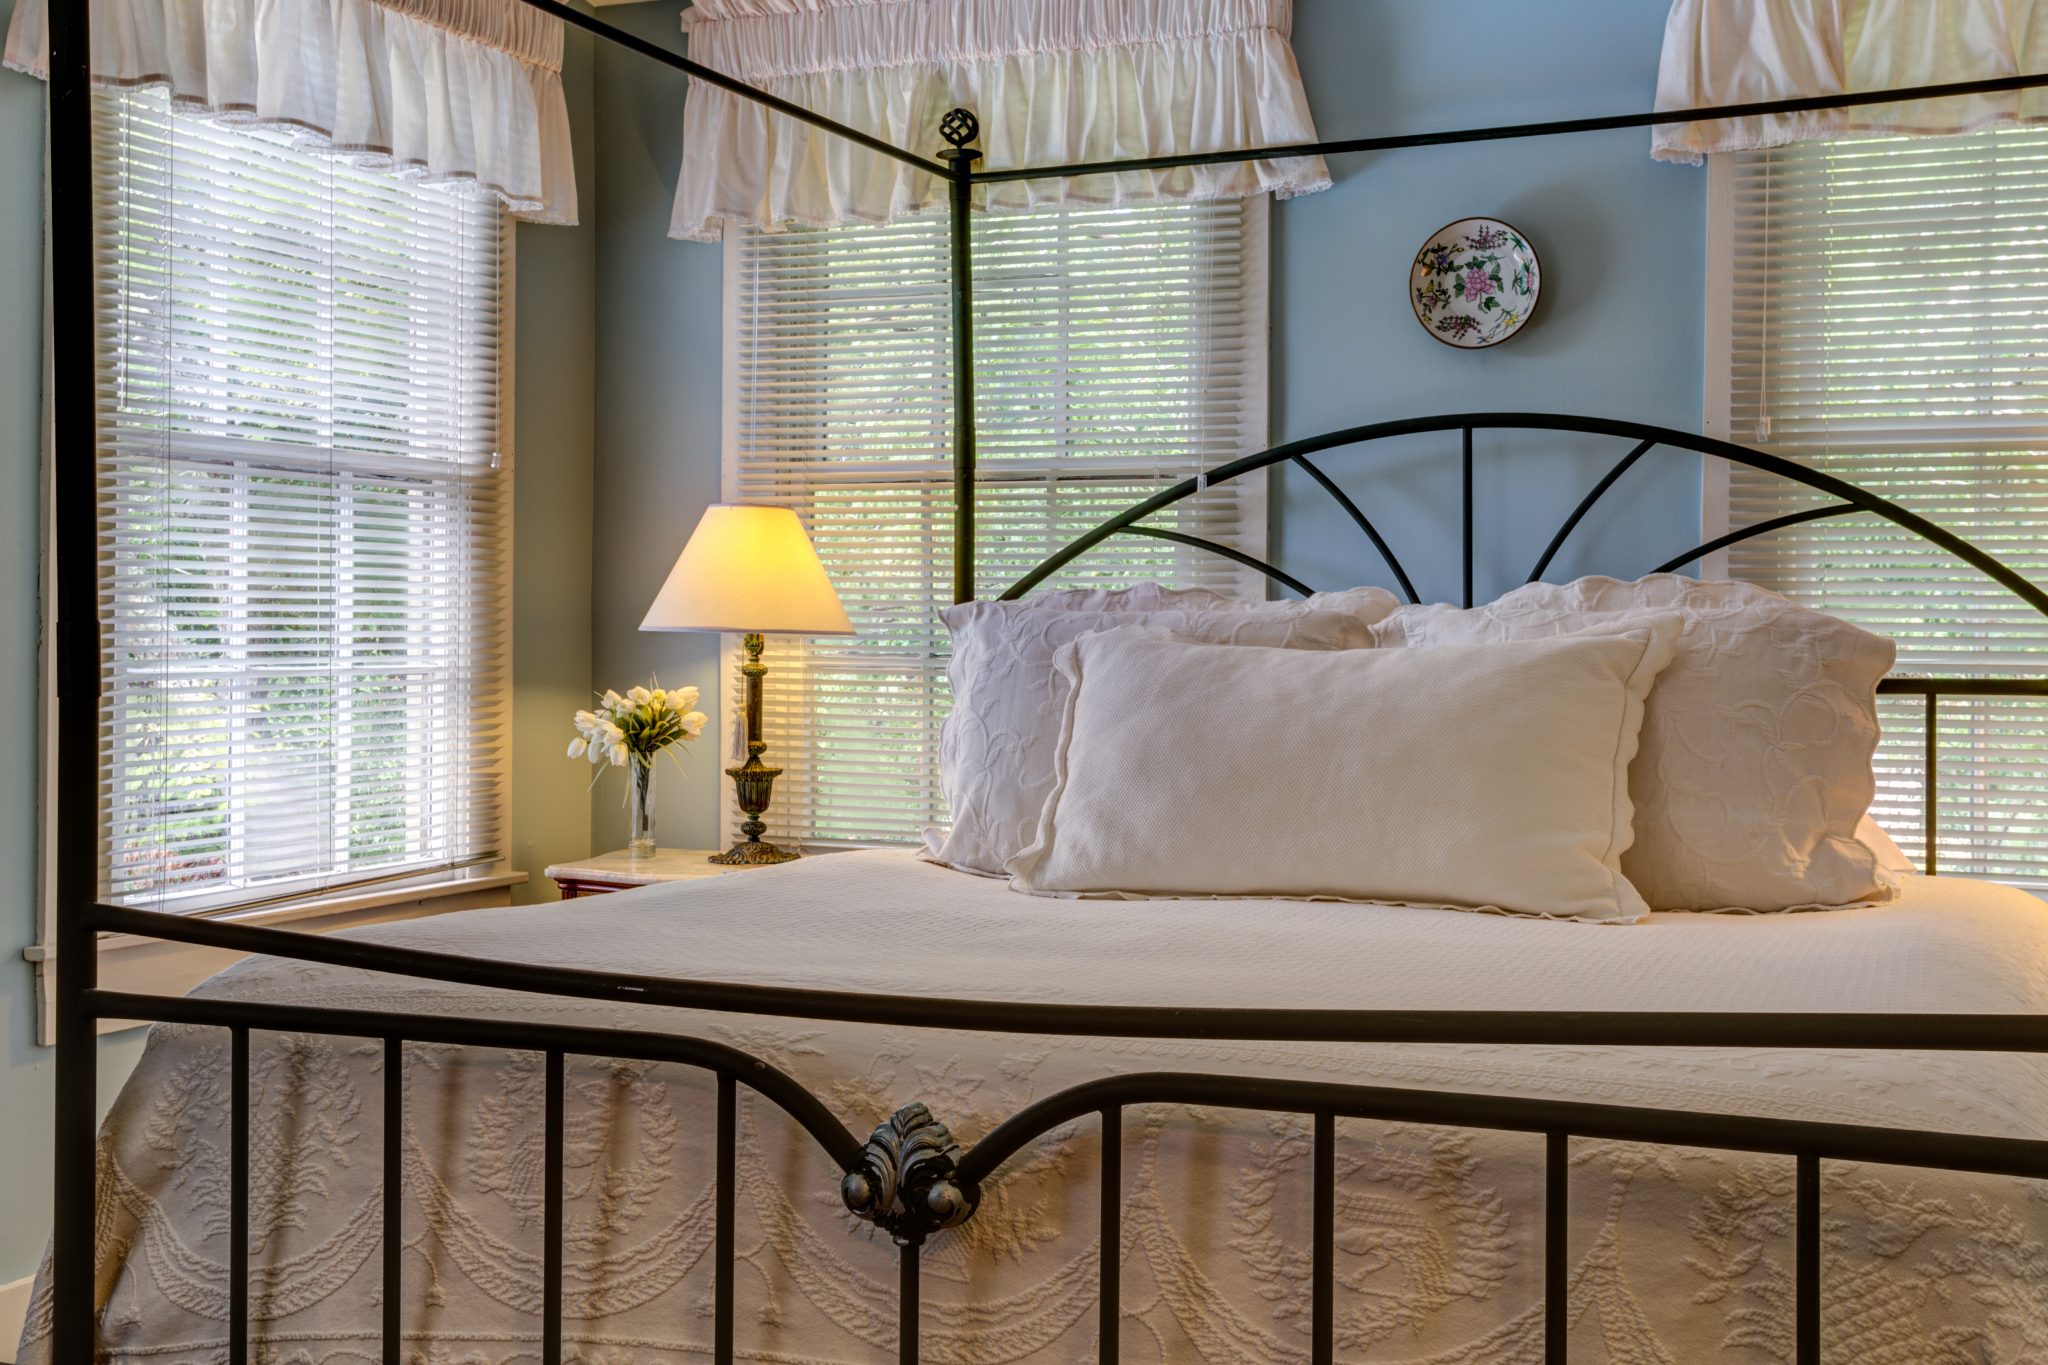 beautiful suite in the fairbanks house on amelia island features cream and white interior decor